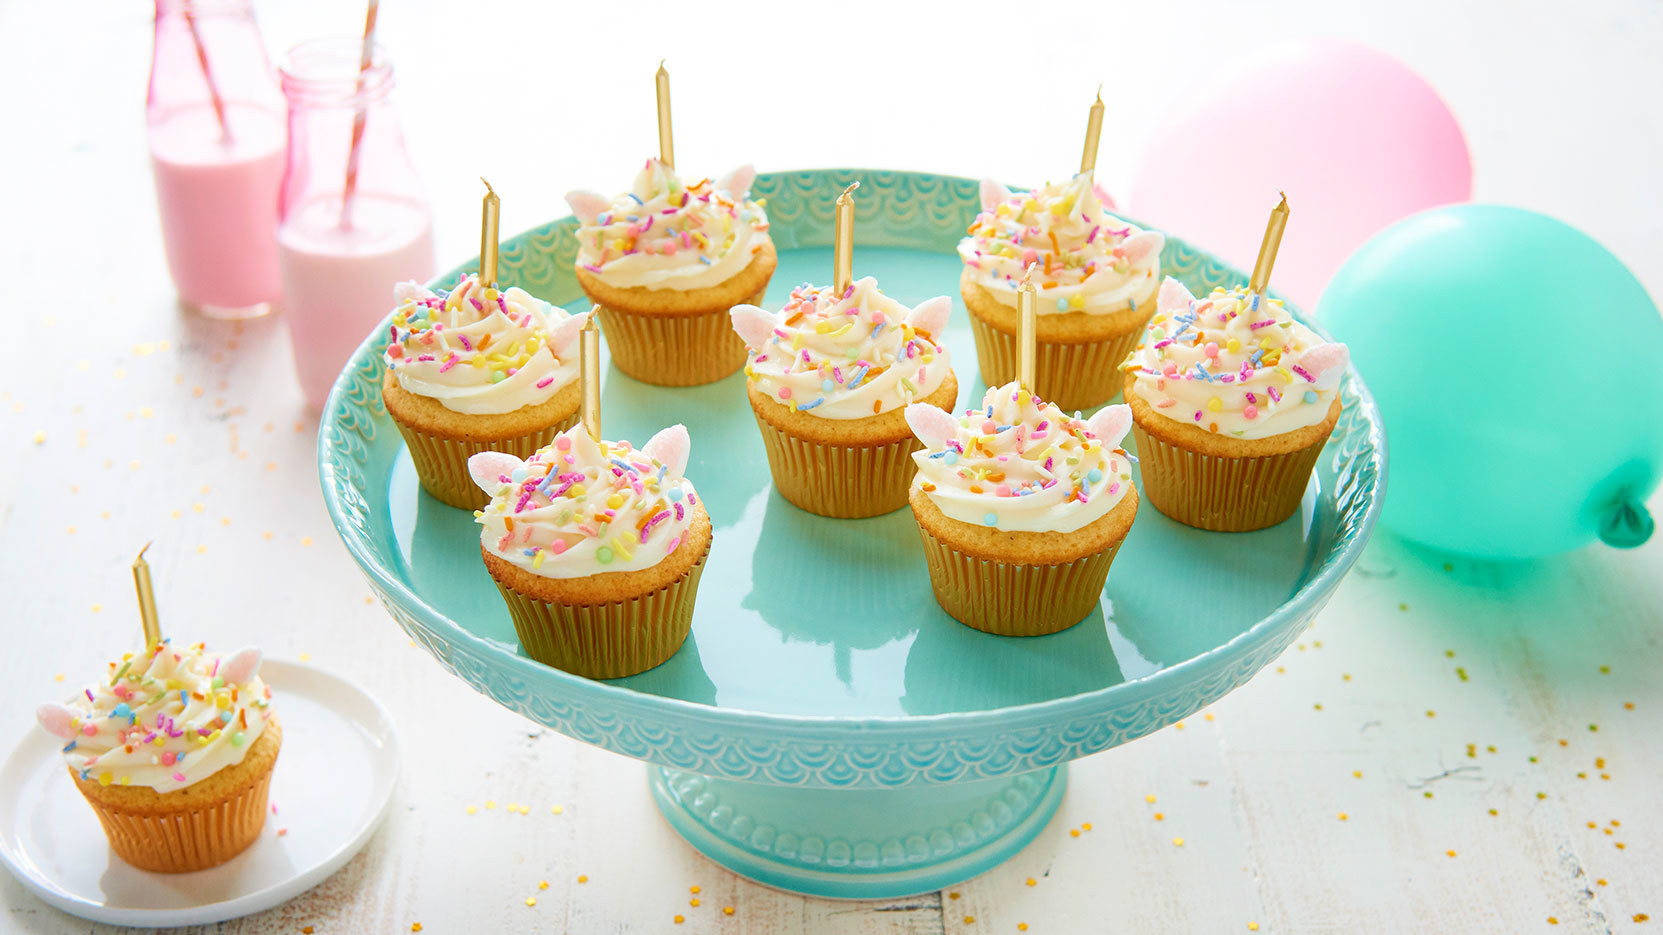 Unicorn Food Ideas For Party
 Magical Unicorn Birthday Party Ideas for Kids EatingWell